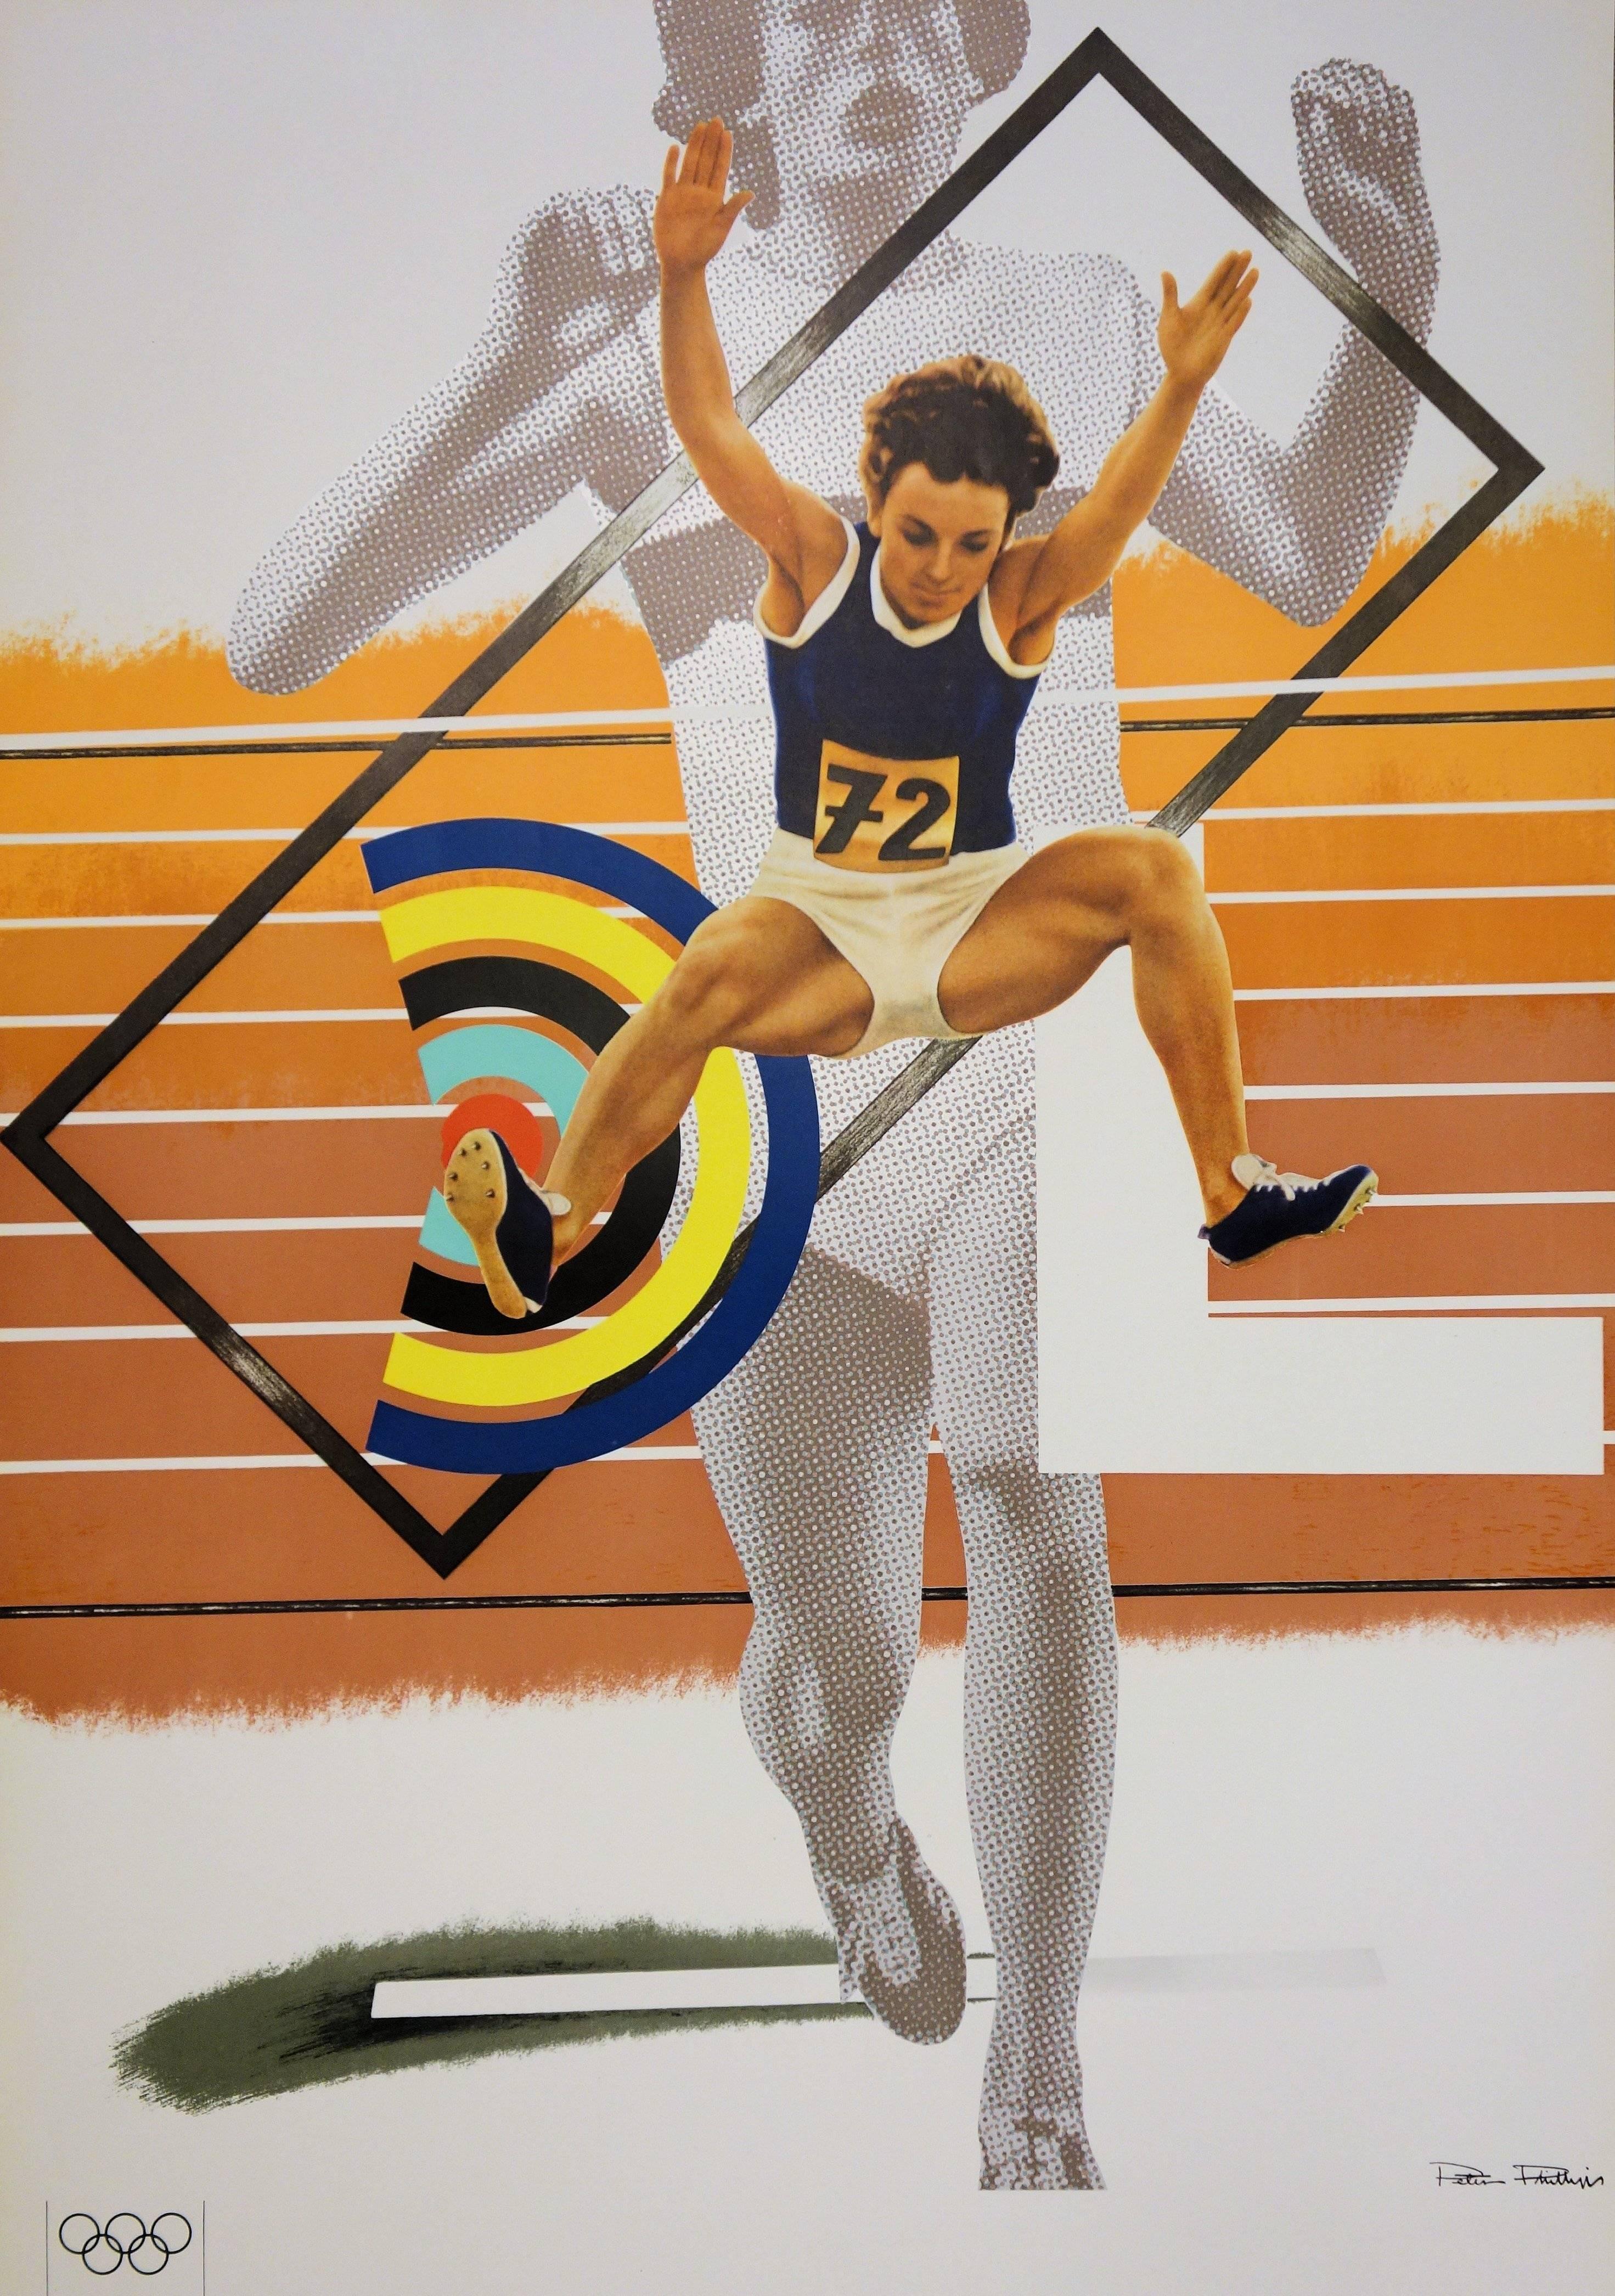 Athletism : Higher, Stronger, Further - Lithograph (Olympic Games Munich 1972) - Modern Print by Peter Phillips